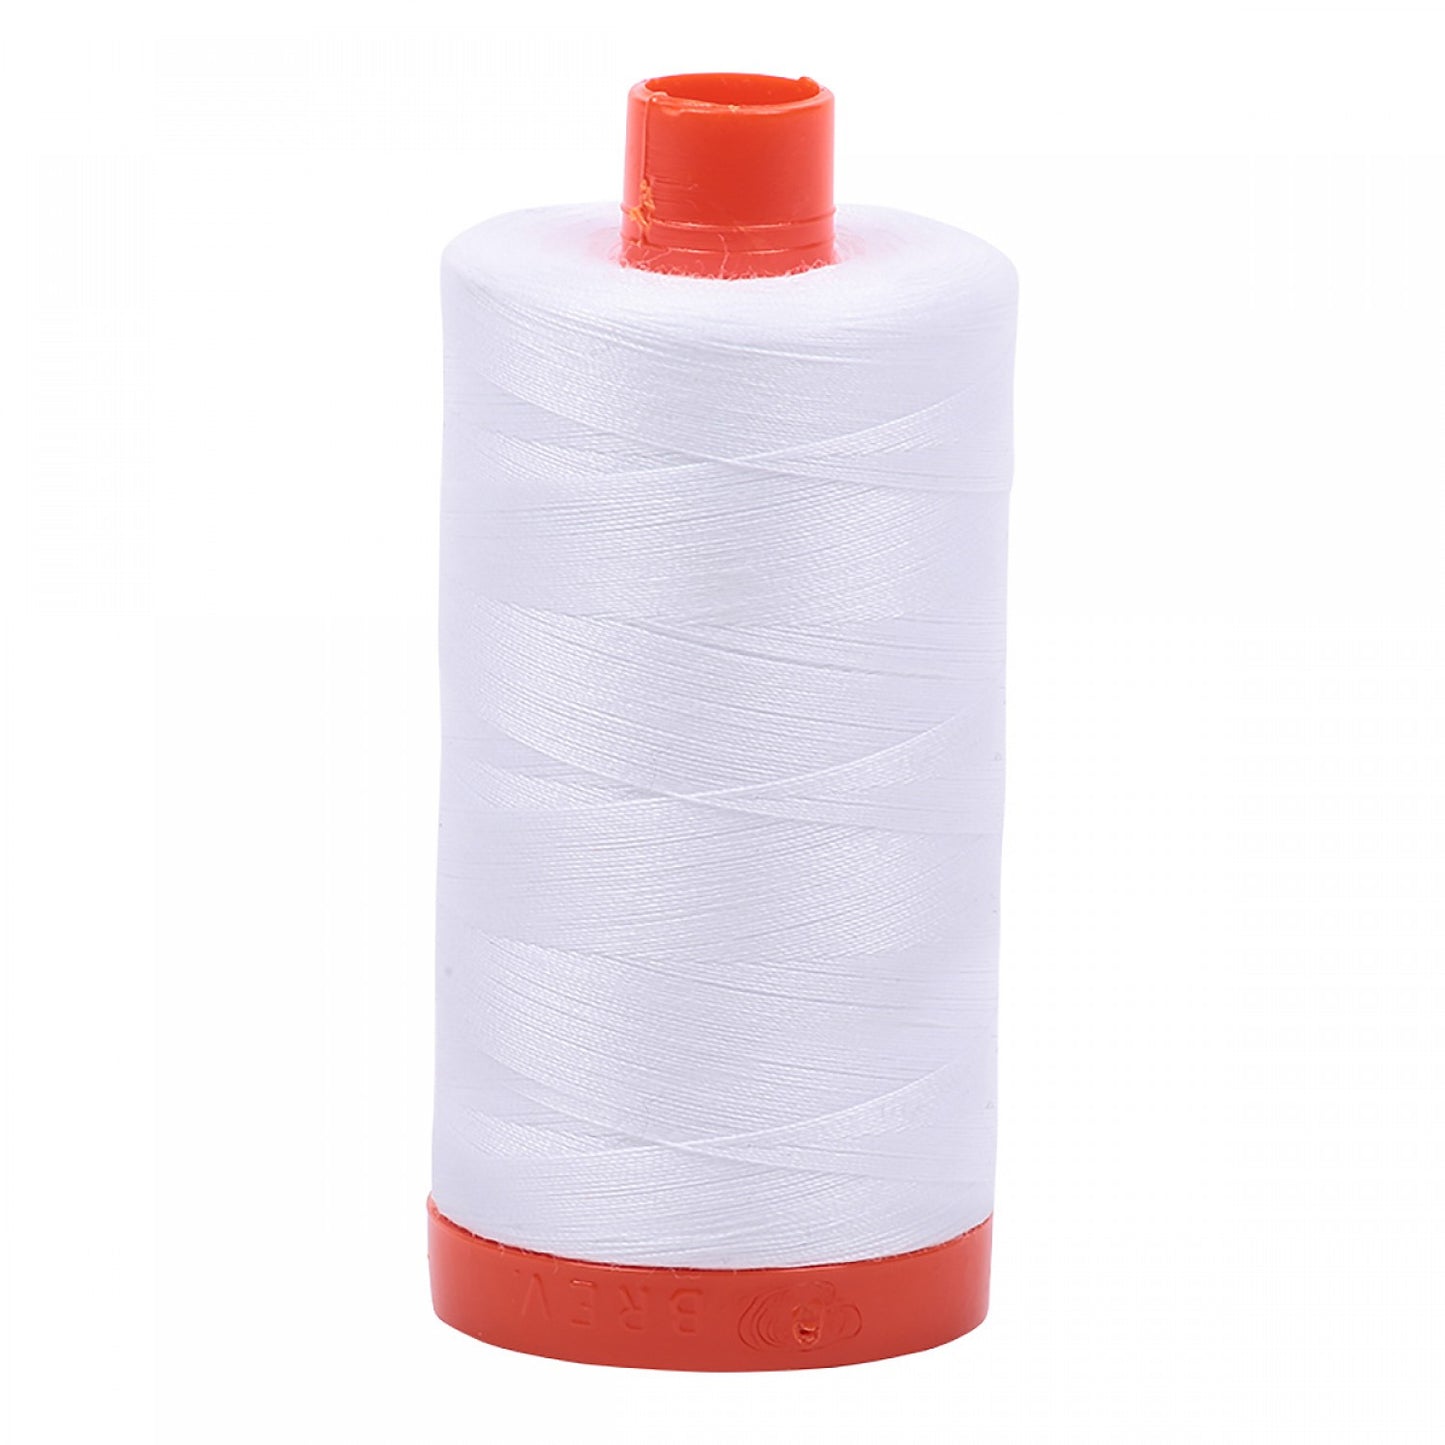 Large Spool 50wt: 2024 White. 1422 yds.  100% Long Staple Mercerized Egyptian Cotton.  For Machine Embroidery, Quilting and Serging. 